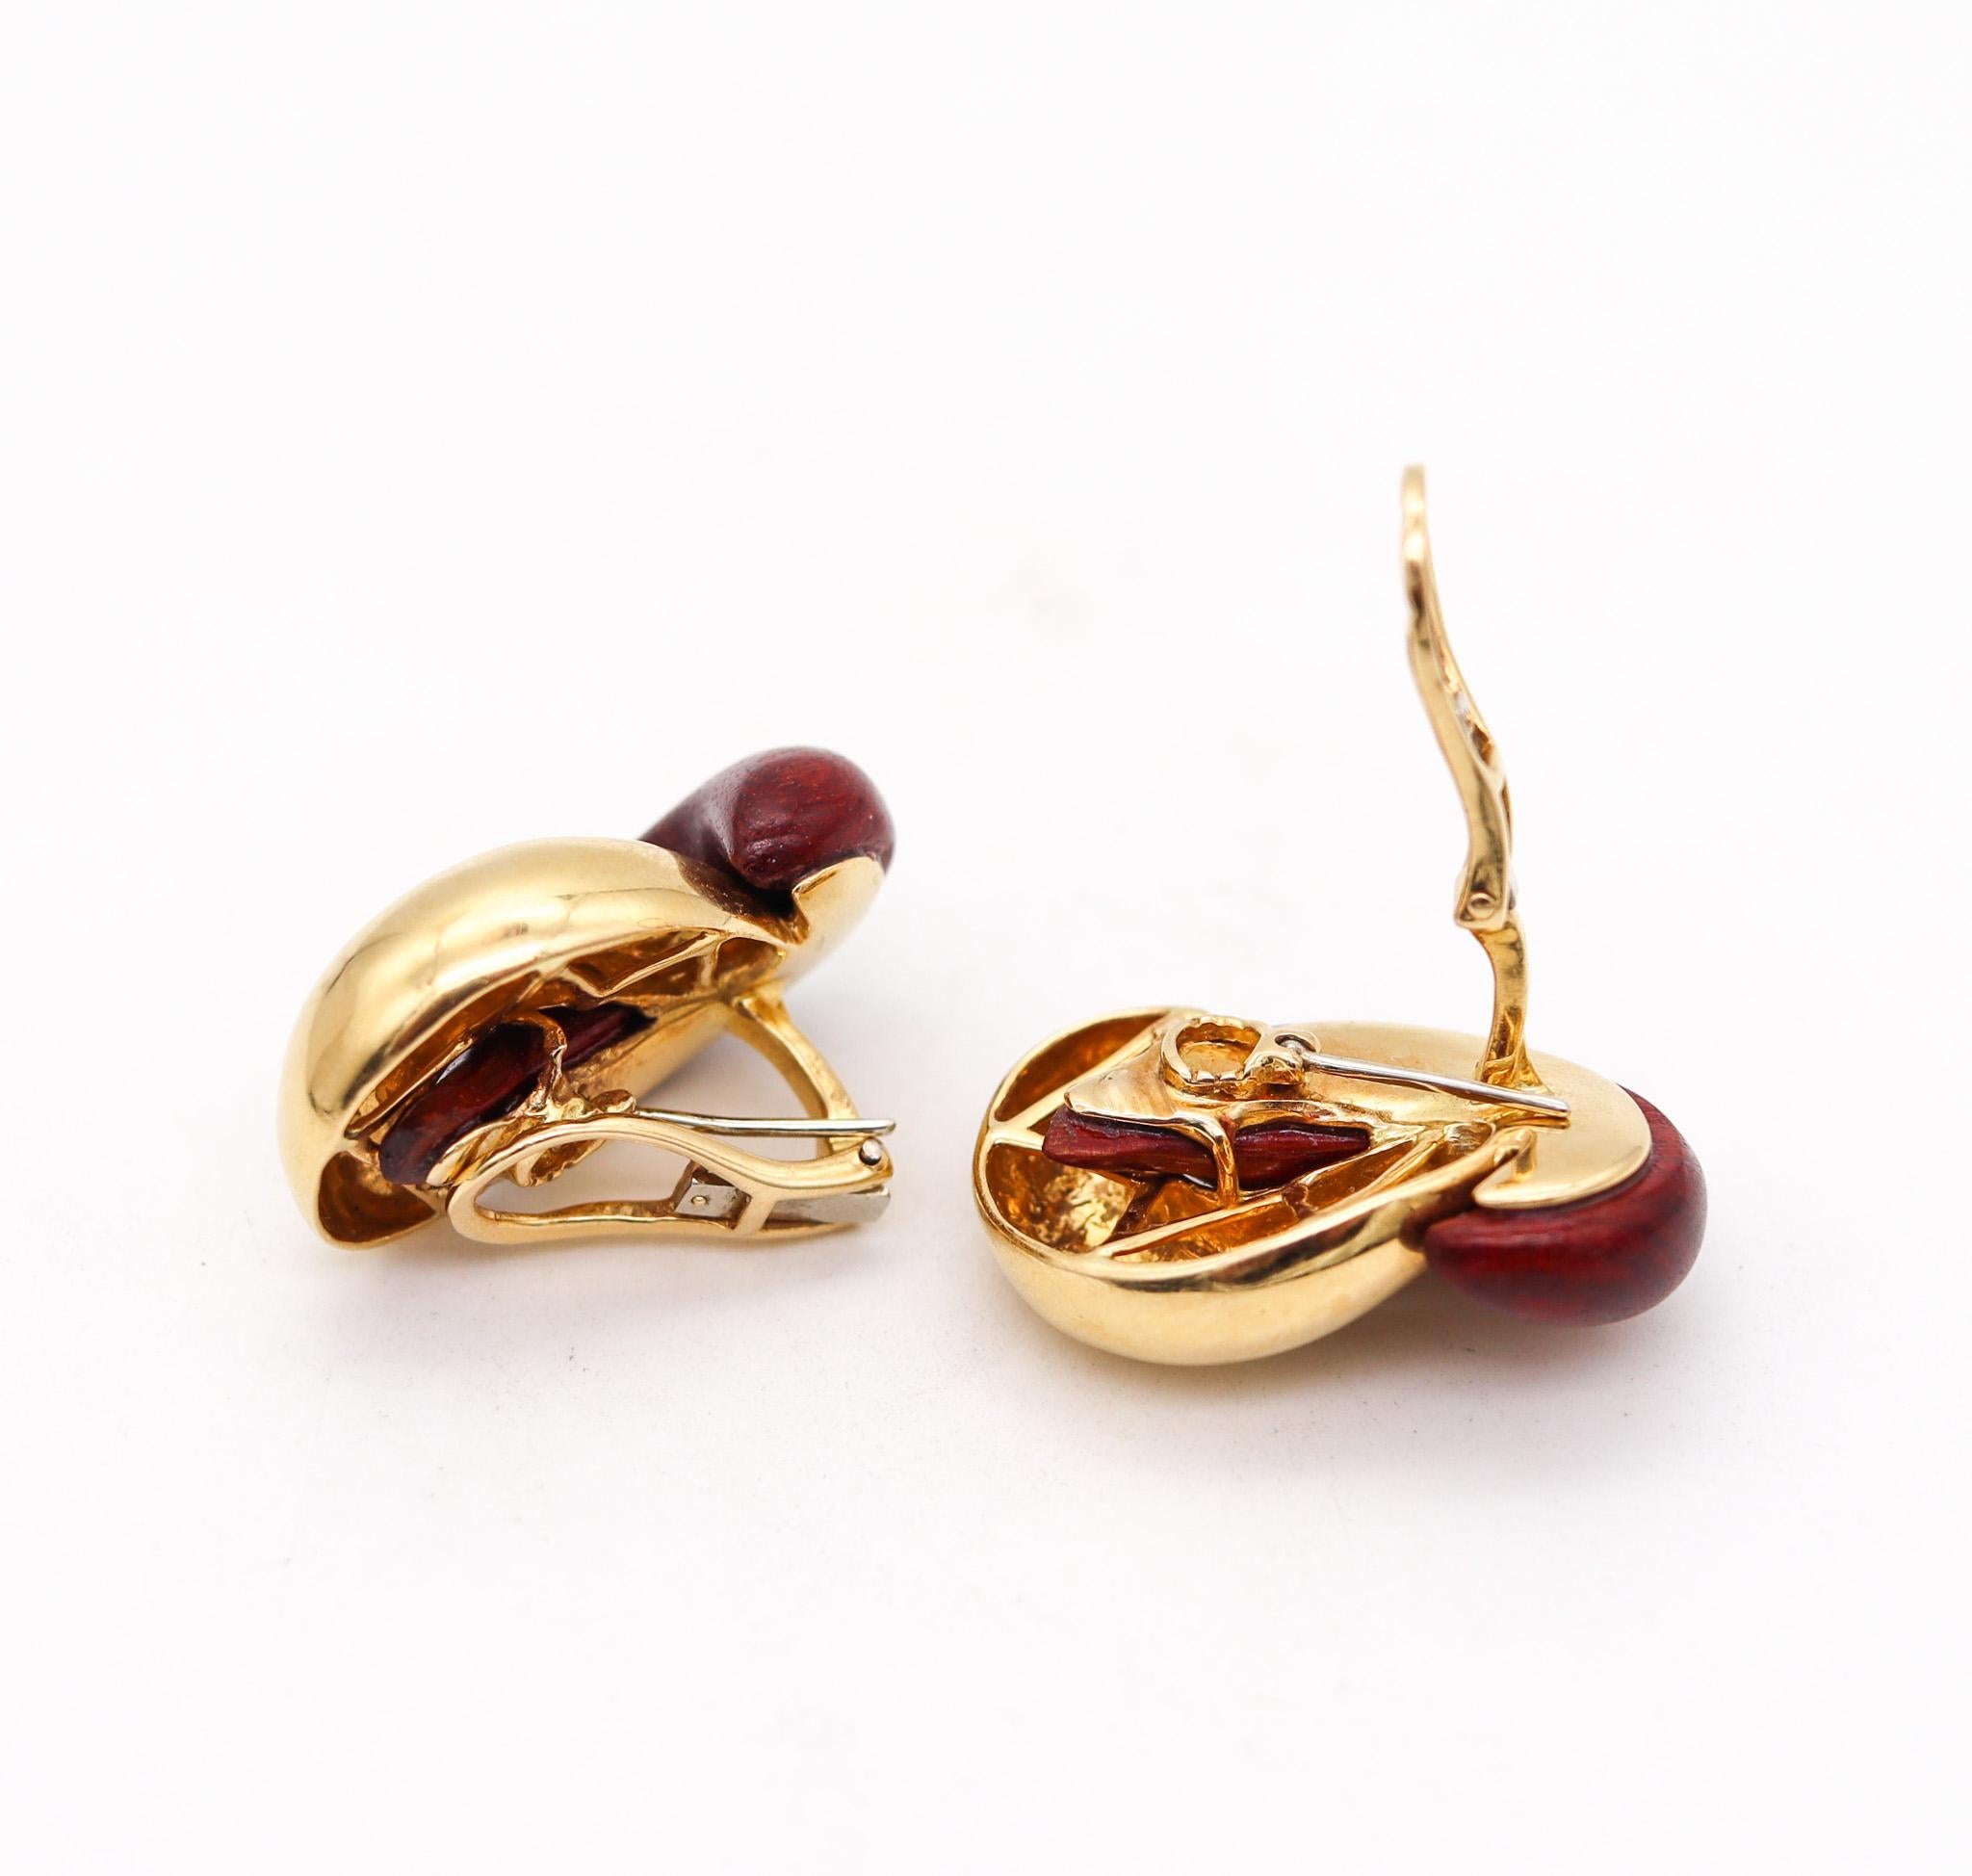 Italian 1970 Modernist Clip Earrings in 18 Karat Yellow Gold with Rose Wood In Excellent Condition For Sale In Miami, FL